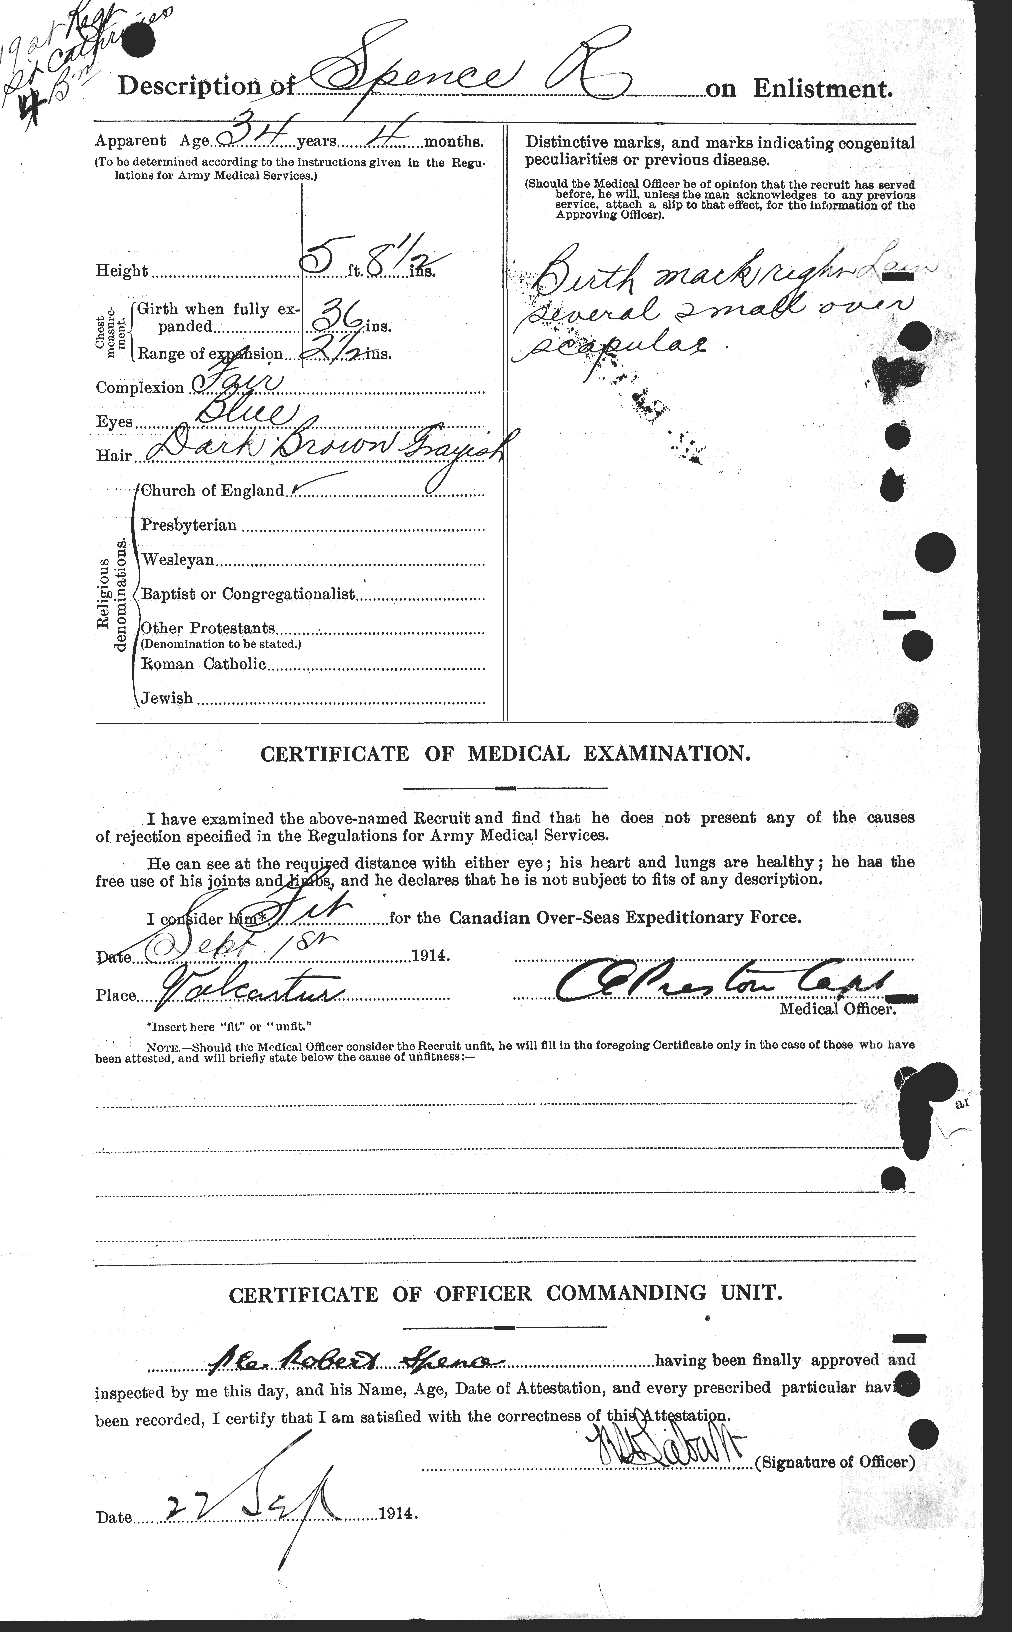 Personnel Records of the First World War - CEF 621411b